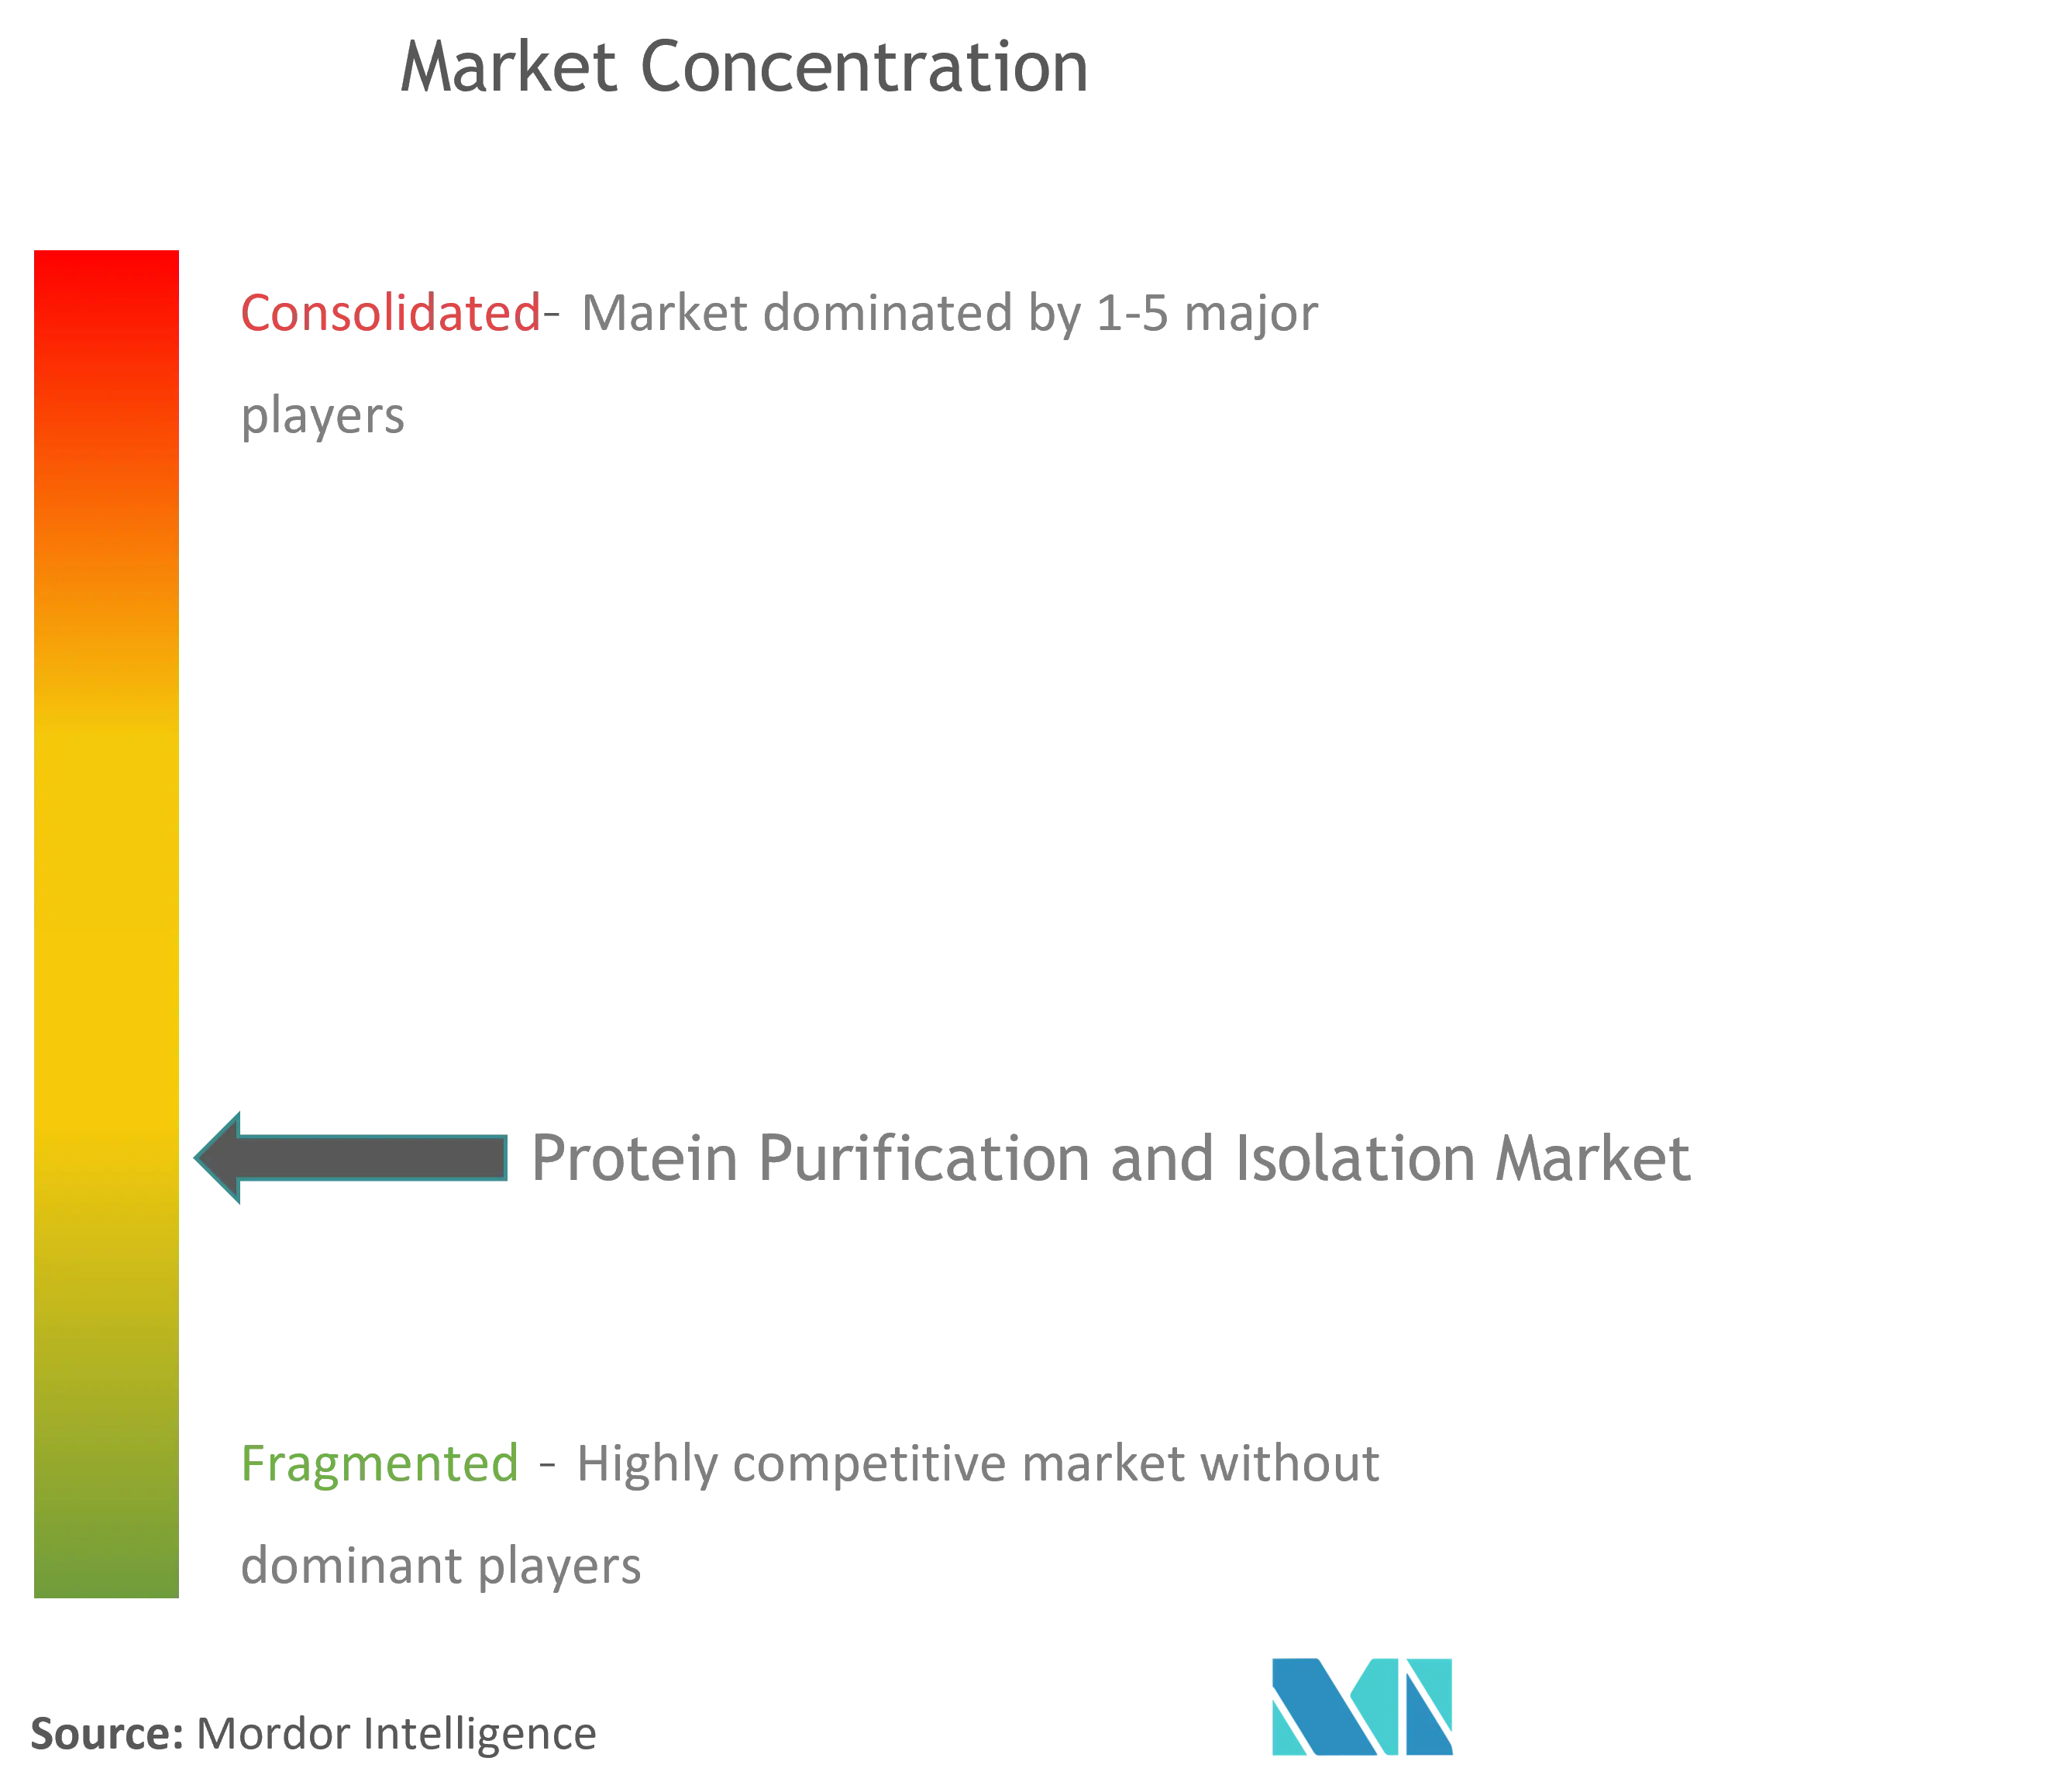 Global Protein Purification and Isolation Market Concentration